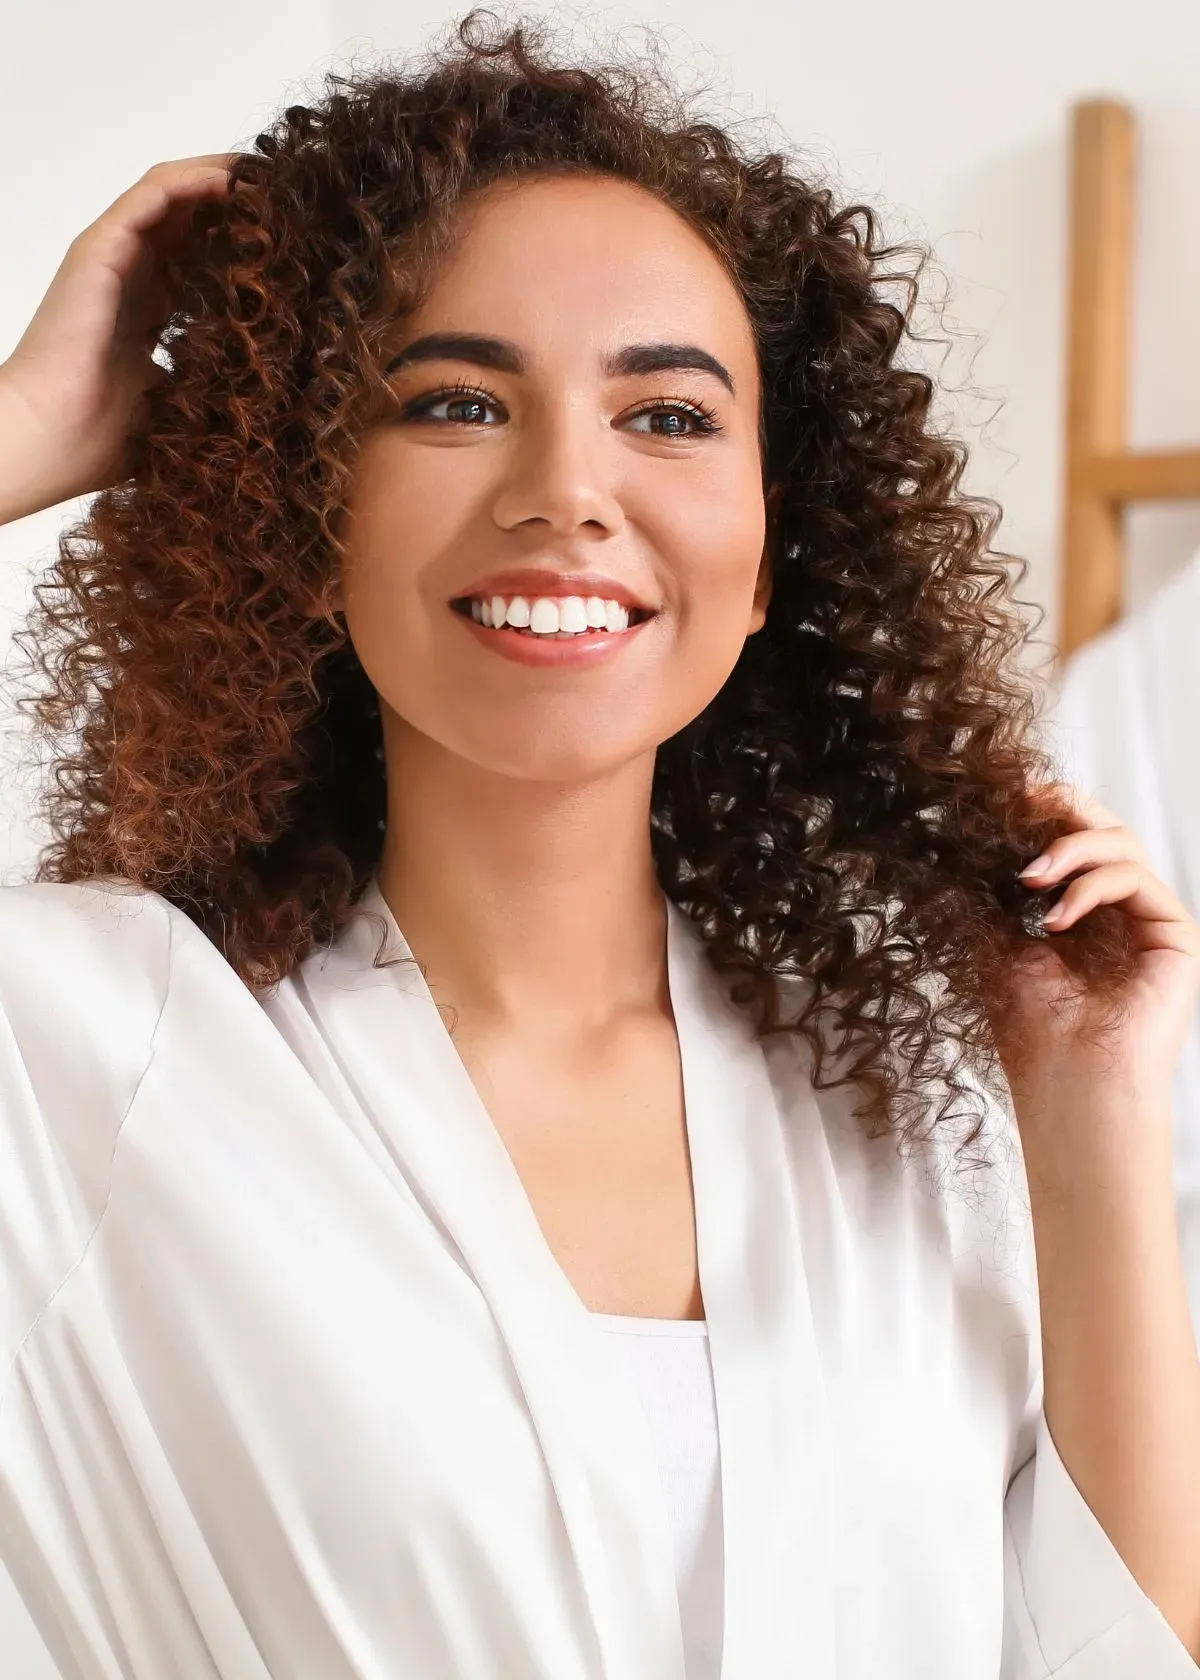 How to Use Leave in Conditioner for Curly Hair?